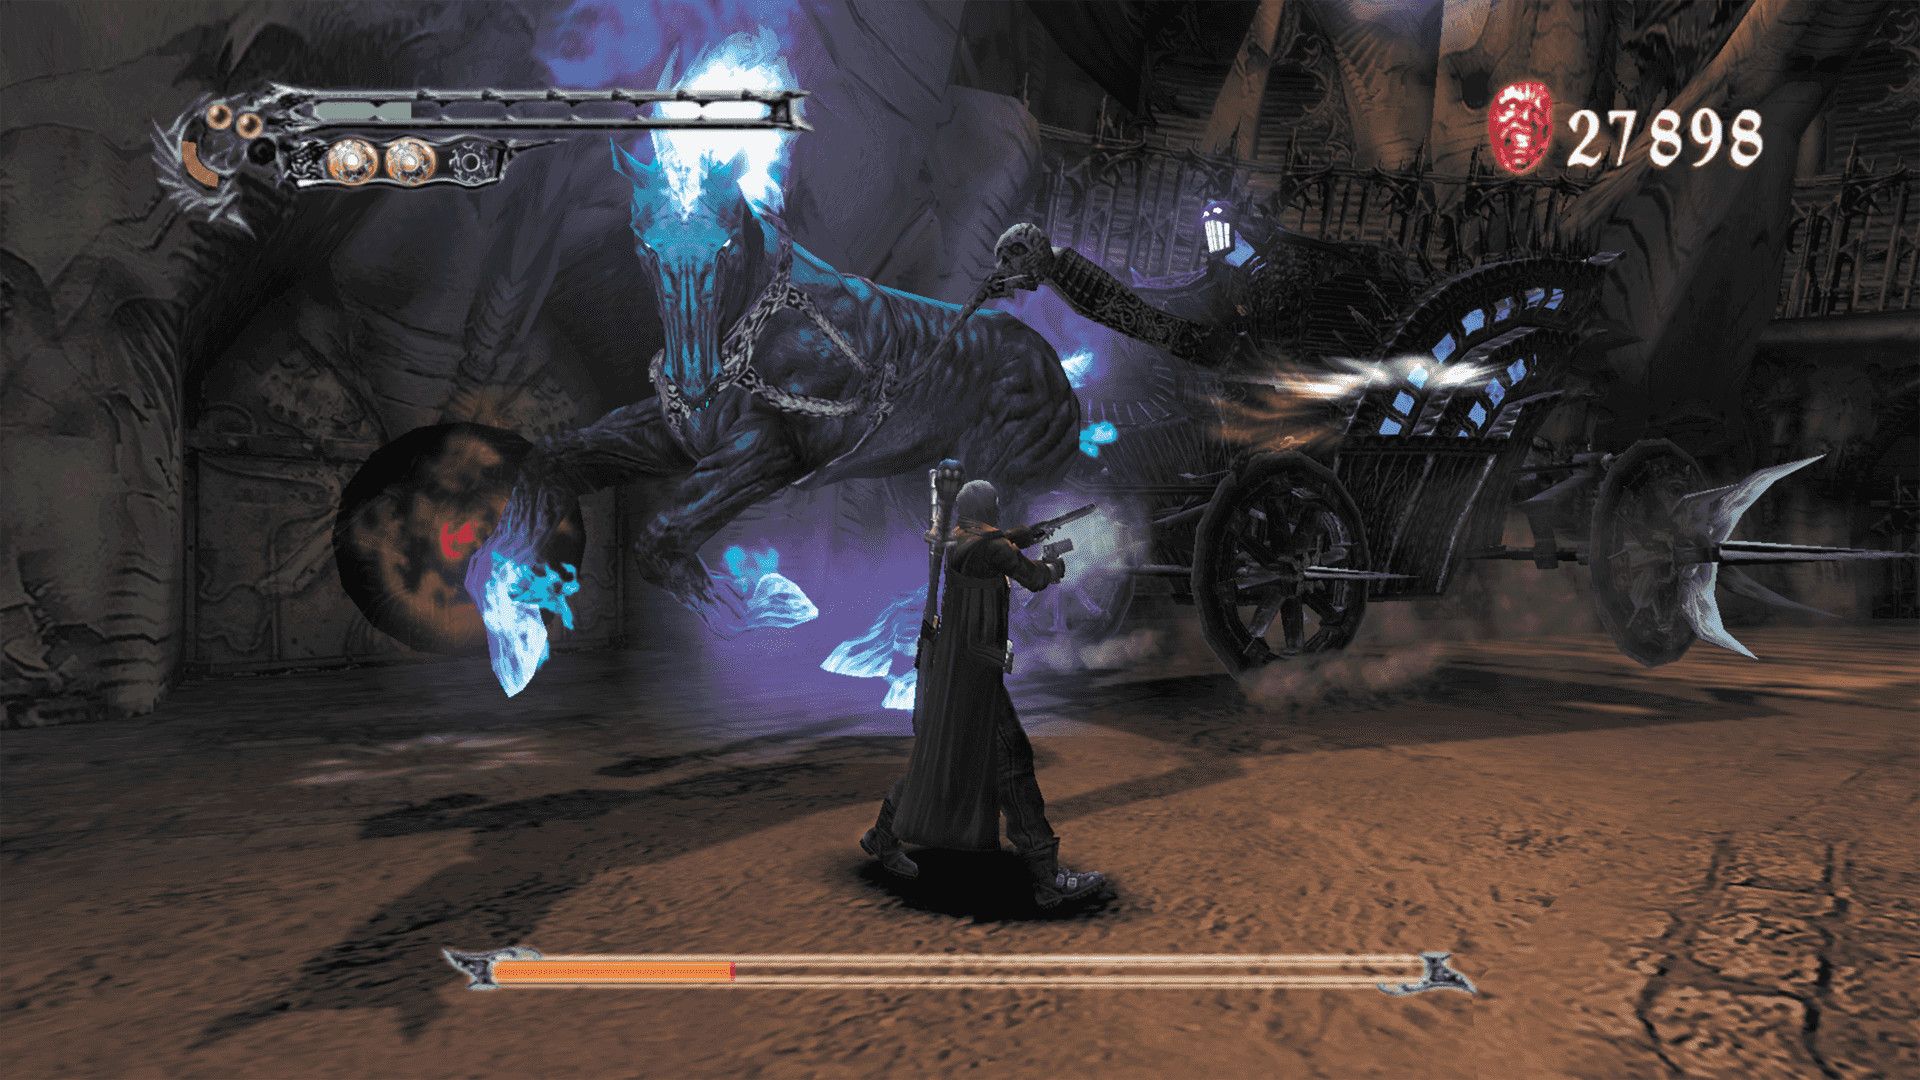 dante fighting boss in devil may cry